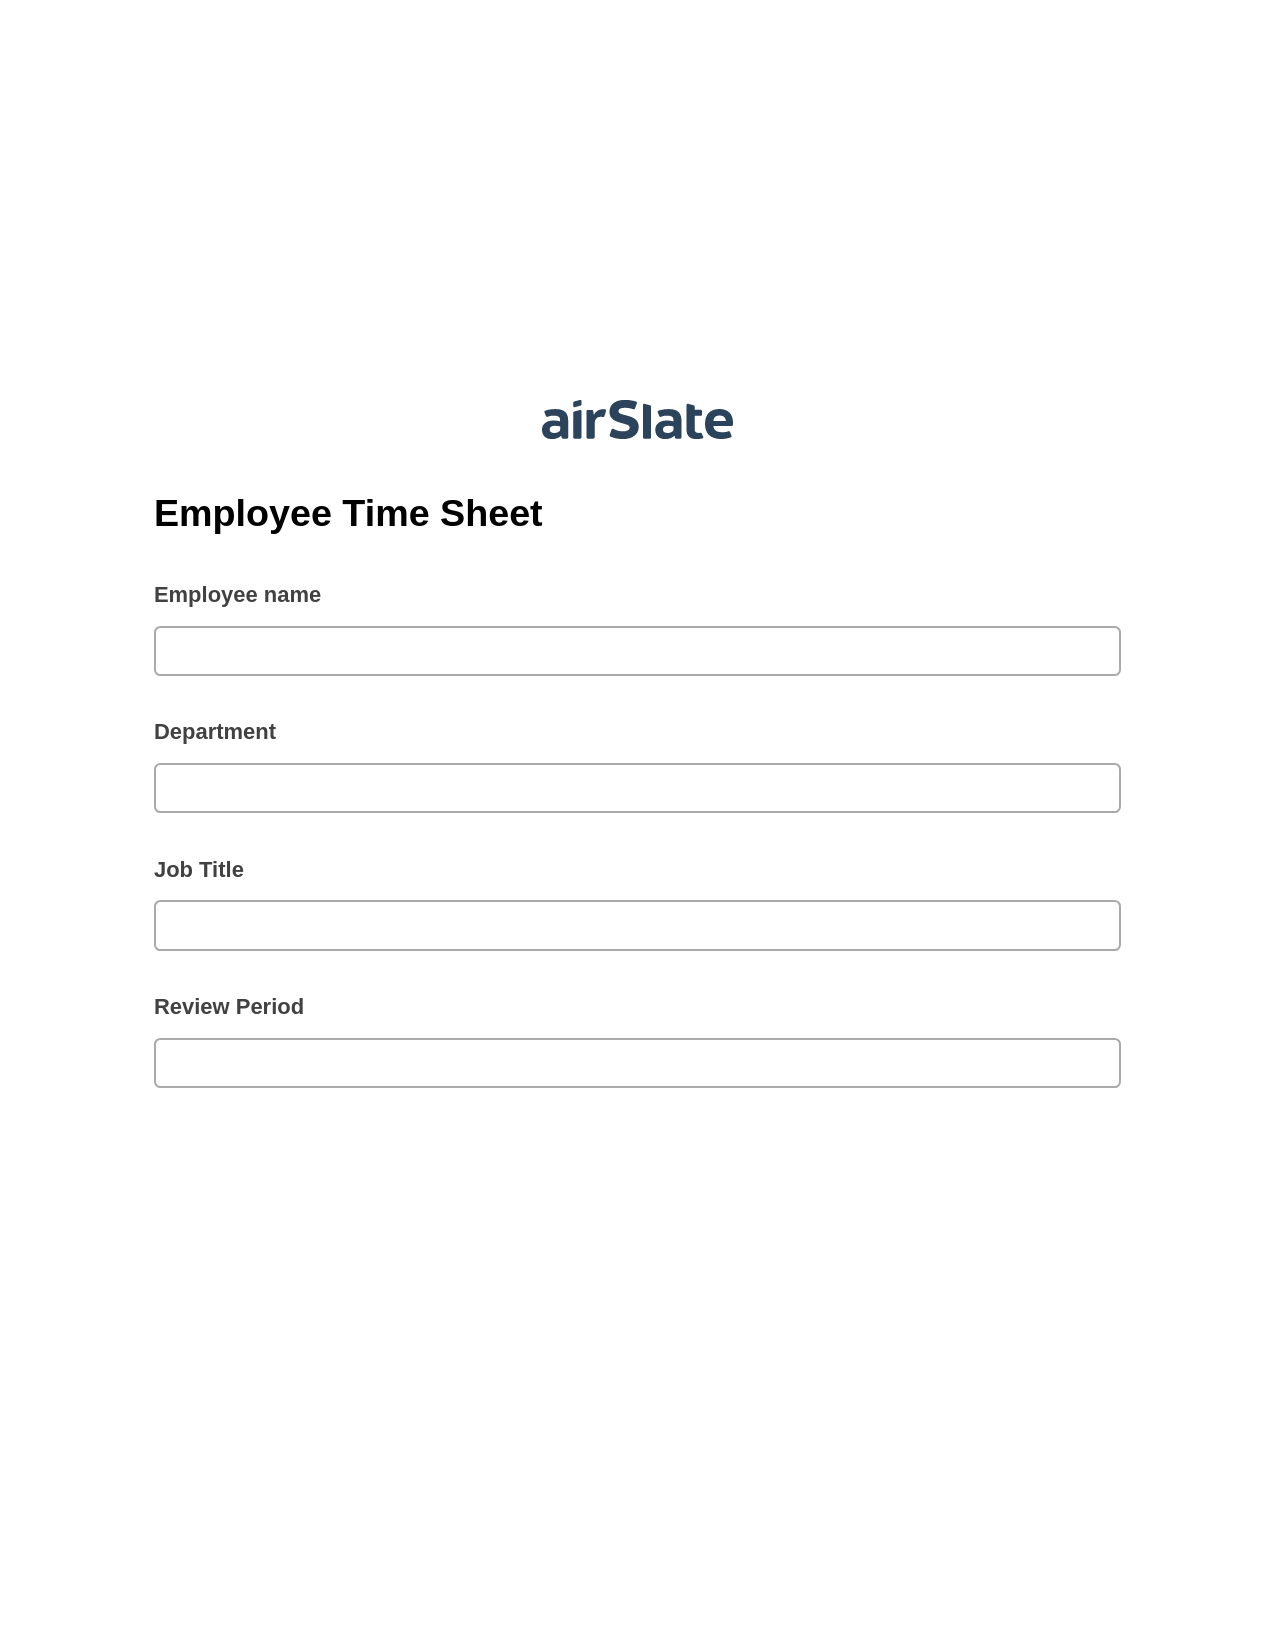 Employee Time Sheet Pre-fill from MS Dynamics 365 Records, Create slate addon, Export to Excel 365 Bot